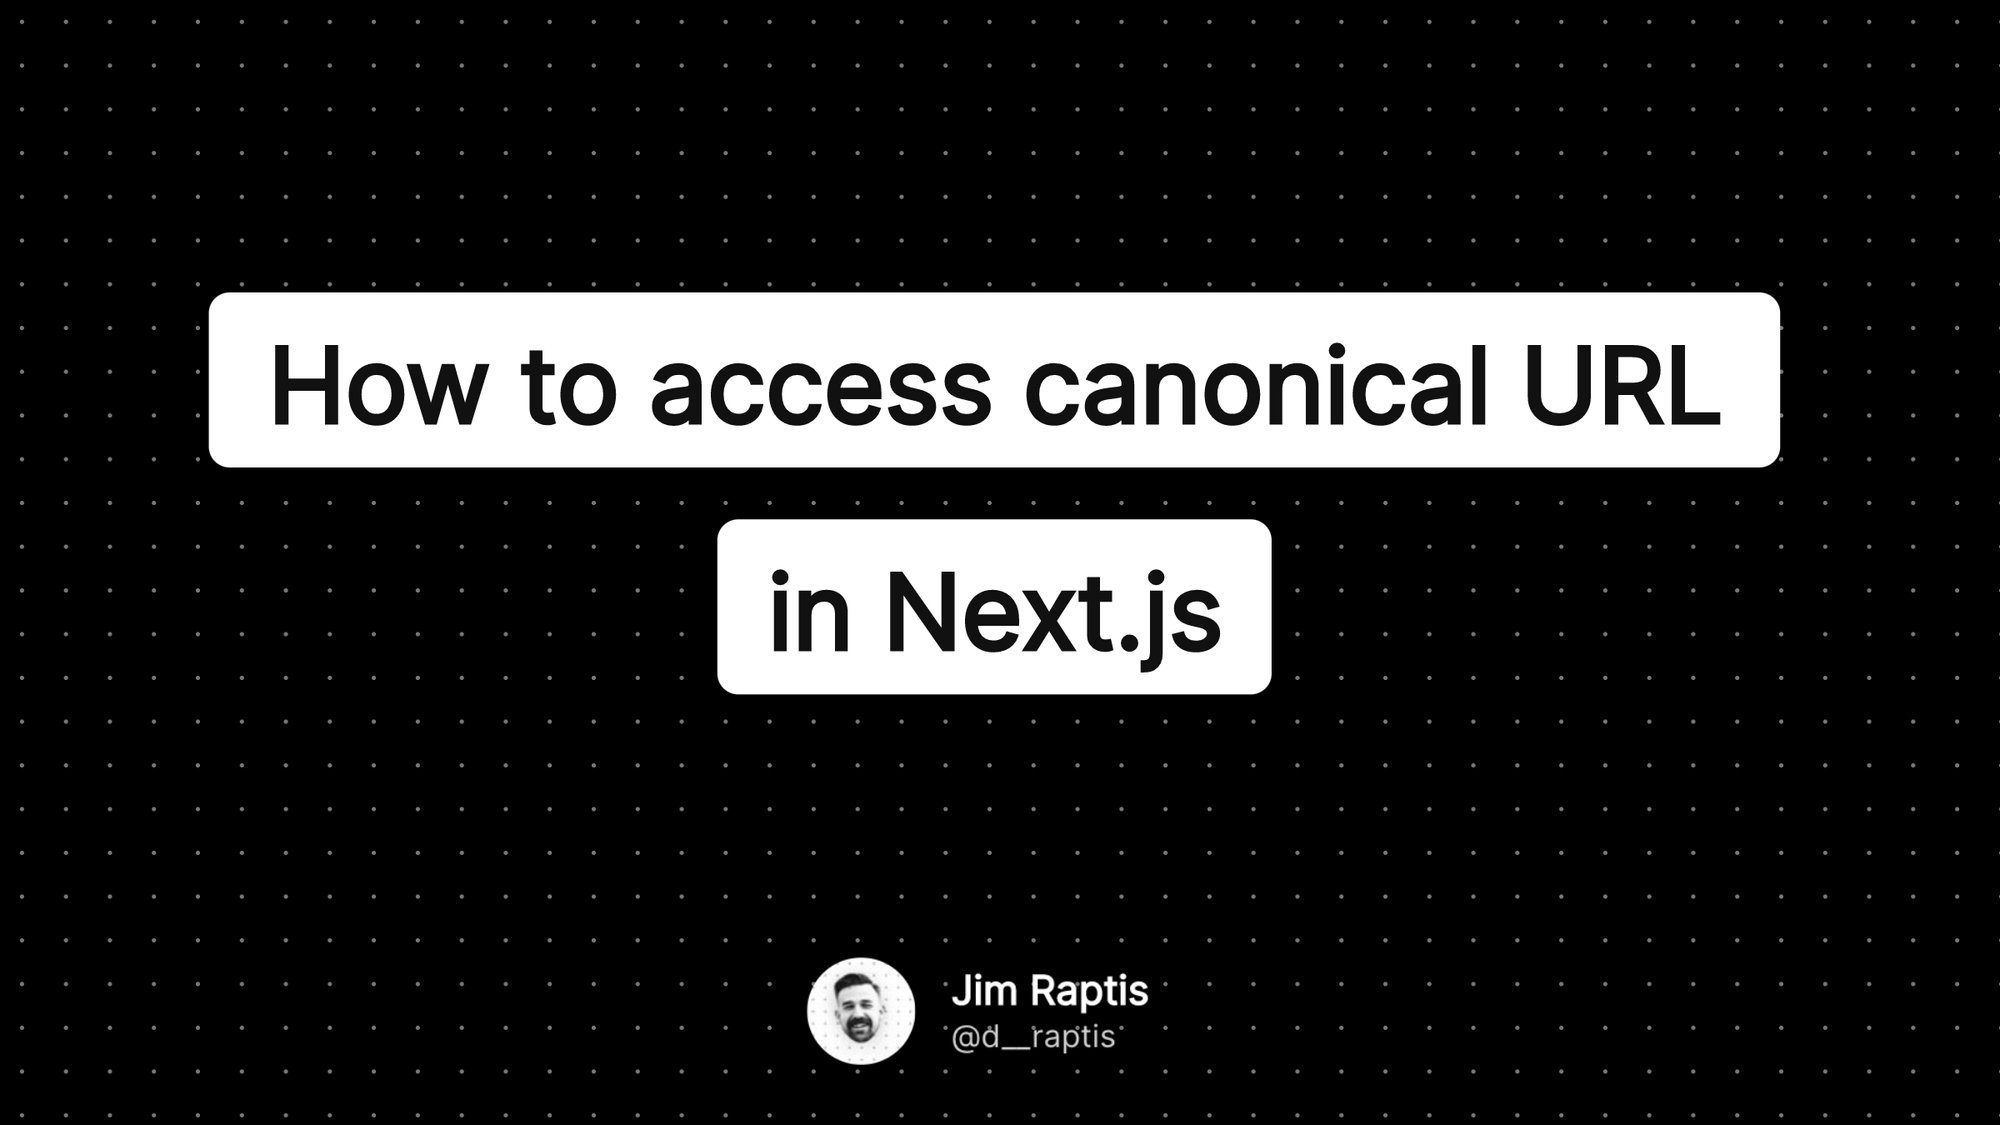 How to access the canonical URL in Next.js